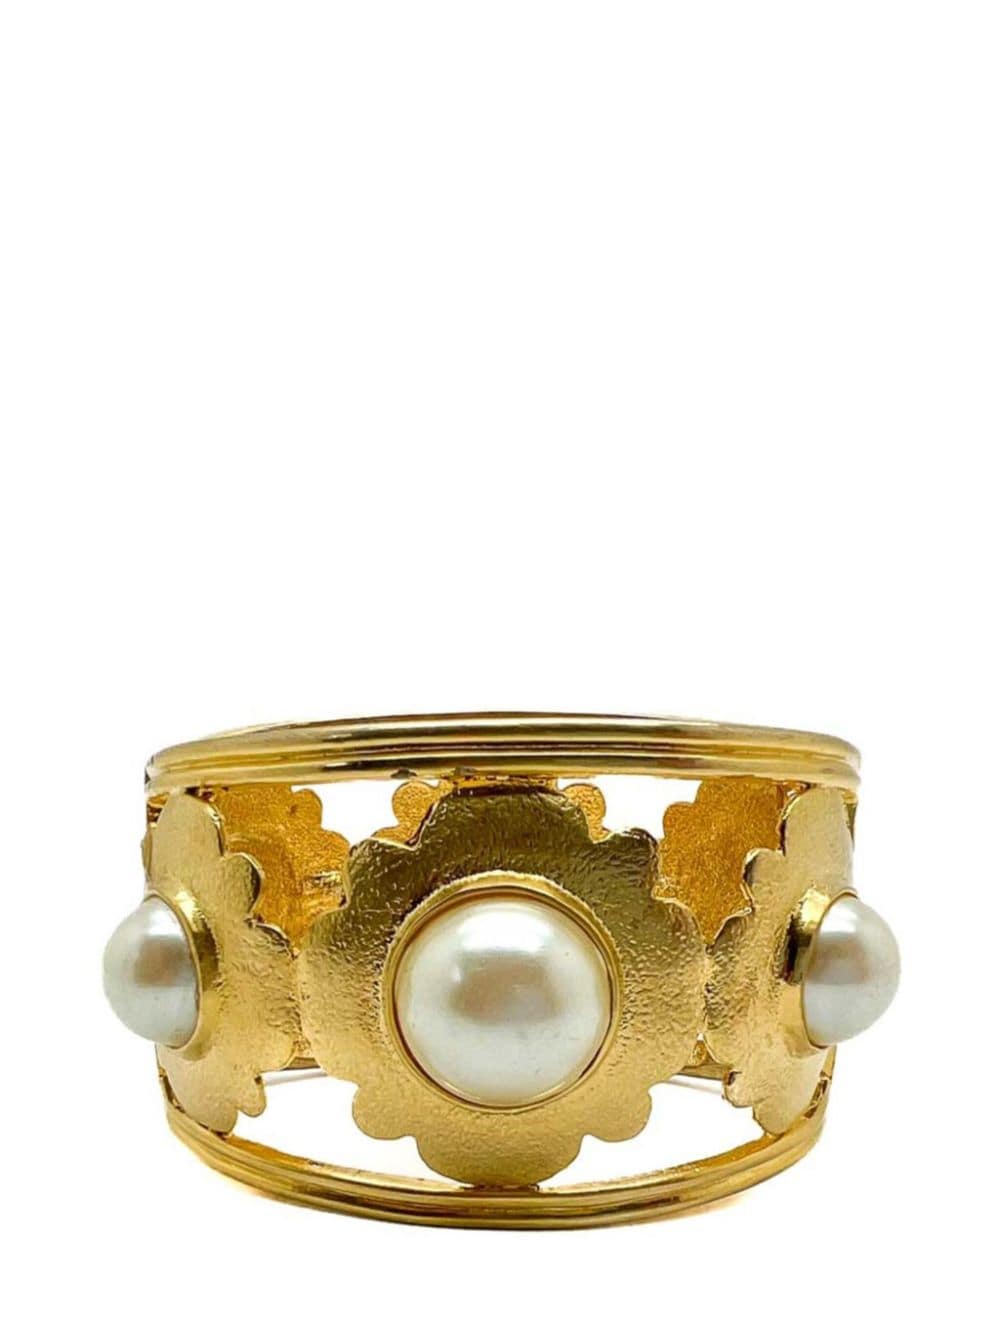 Jennifer Gibson Vintage Broad Pearl Floral Motif Cuff 1980s In Gold